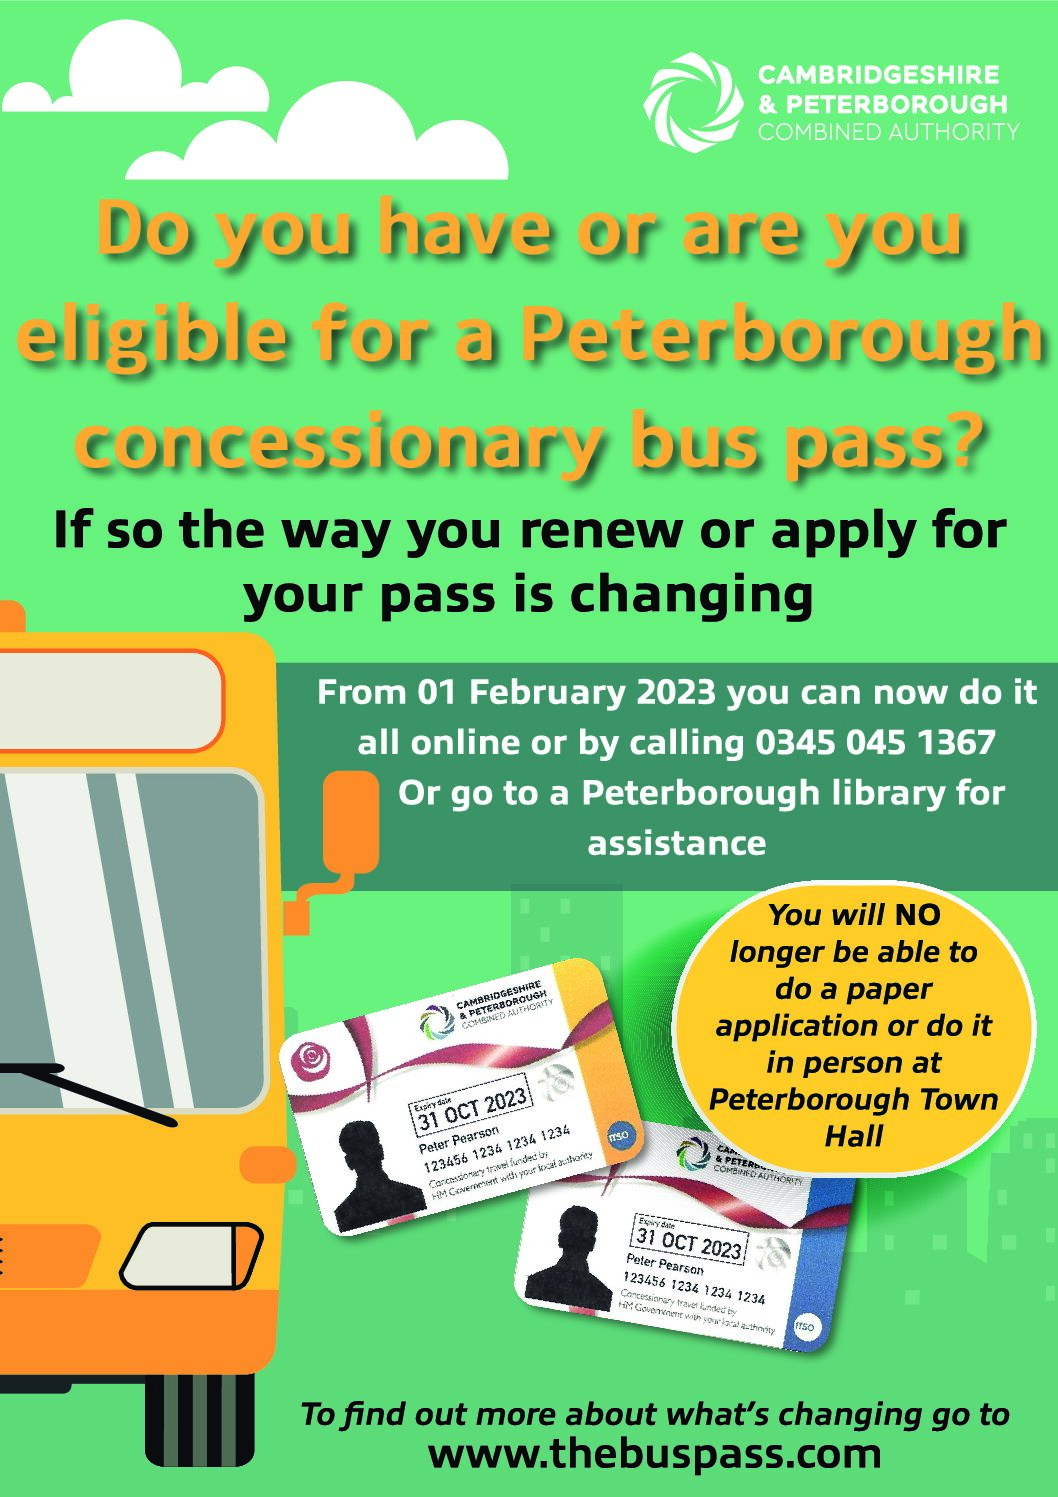 Changes to how you can apply for a bus pass from 1 February 2023